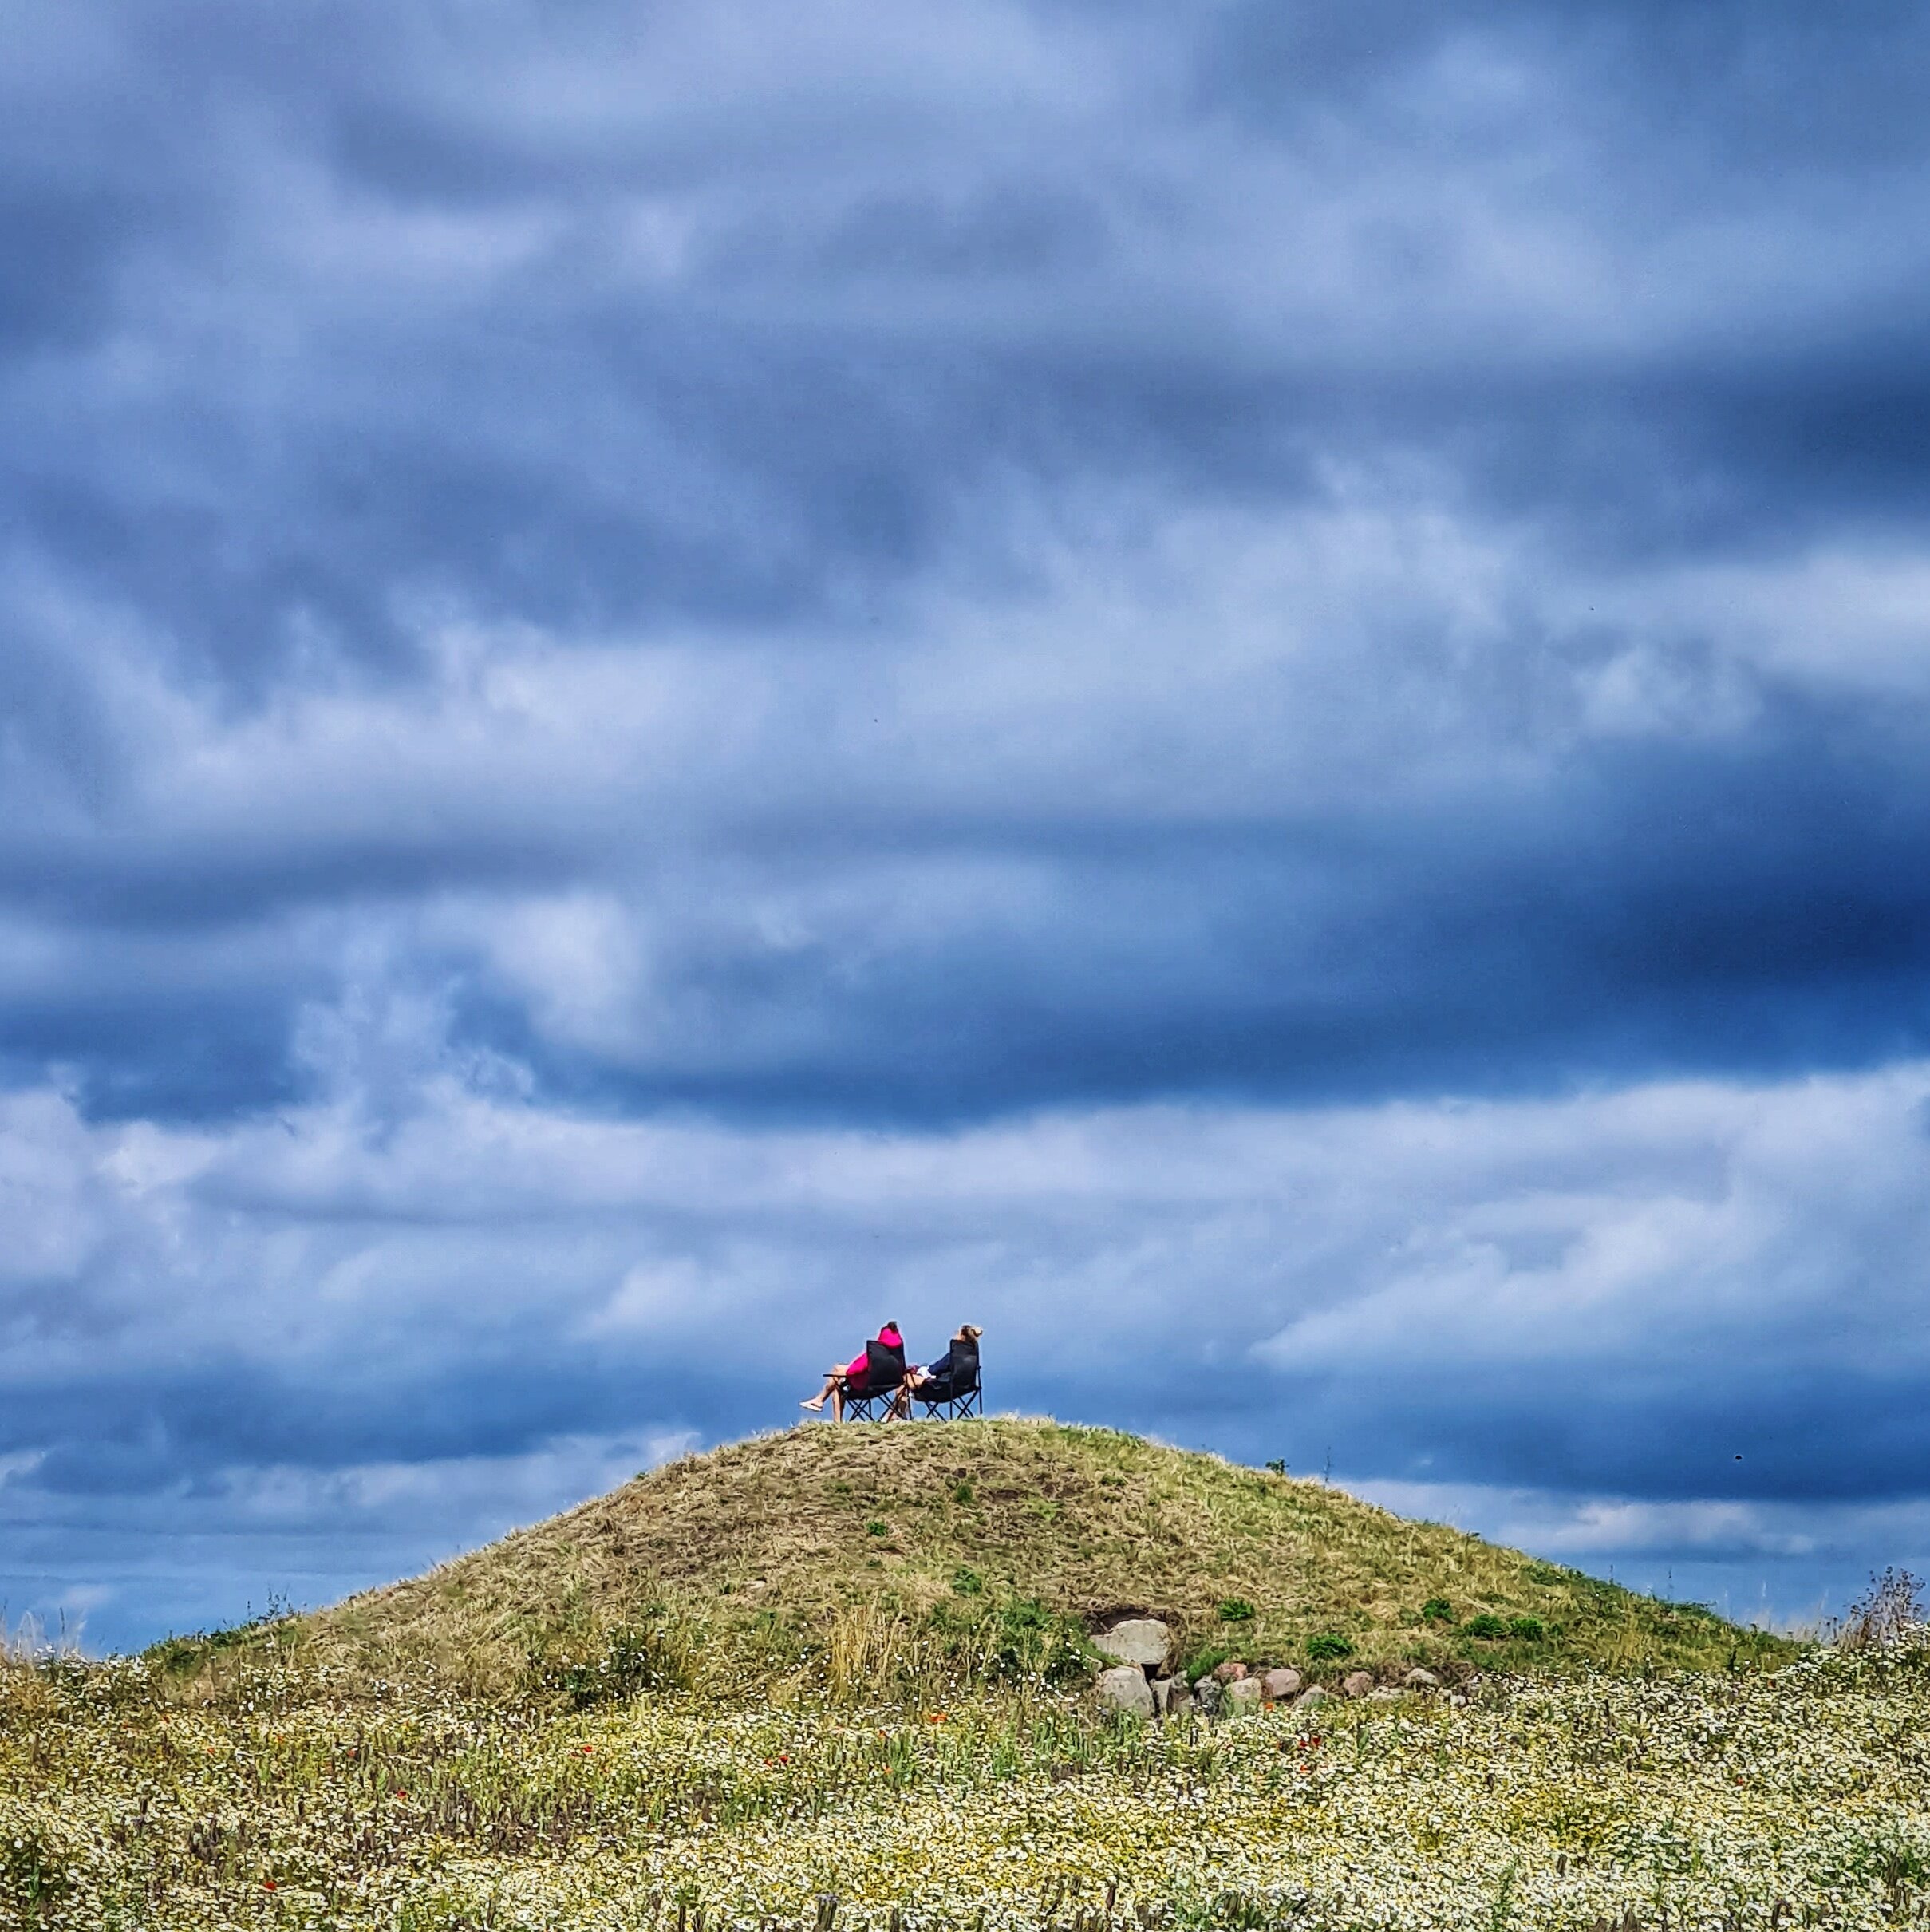 Day 192 - July 11: Relaxing on the burial mound